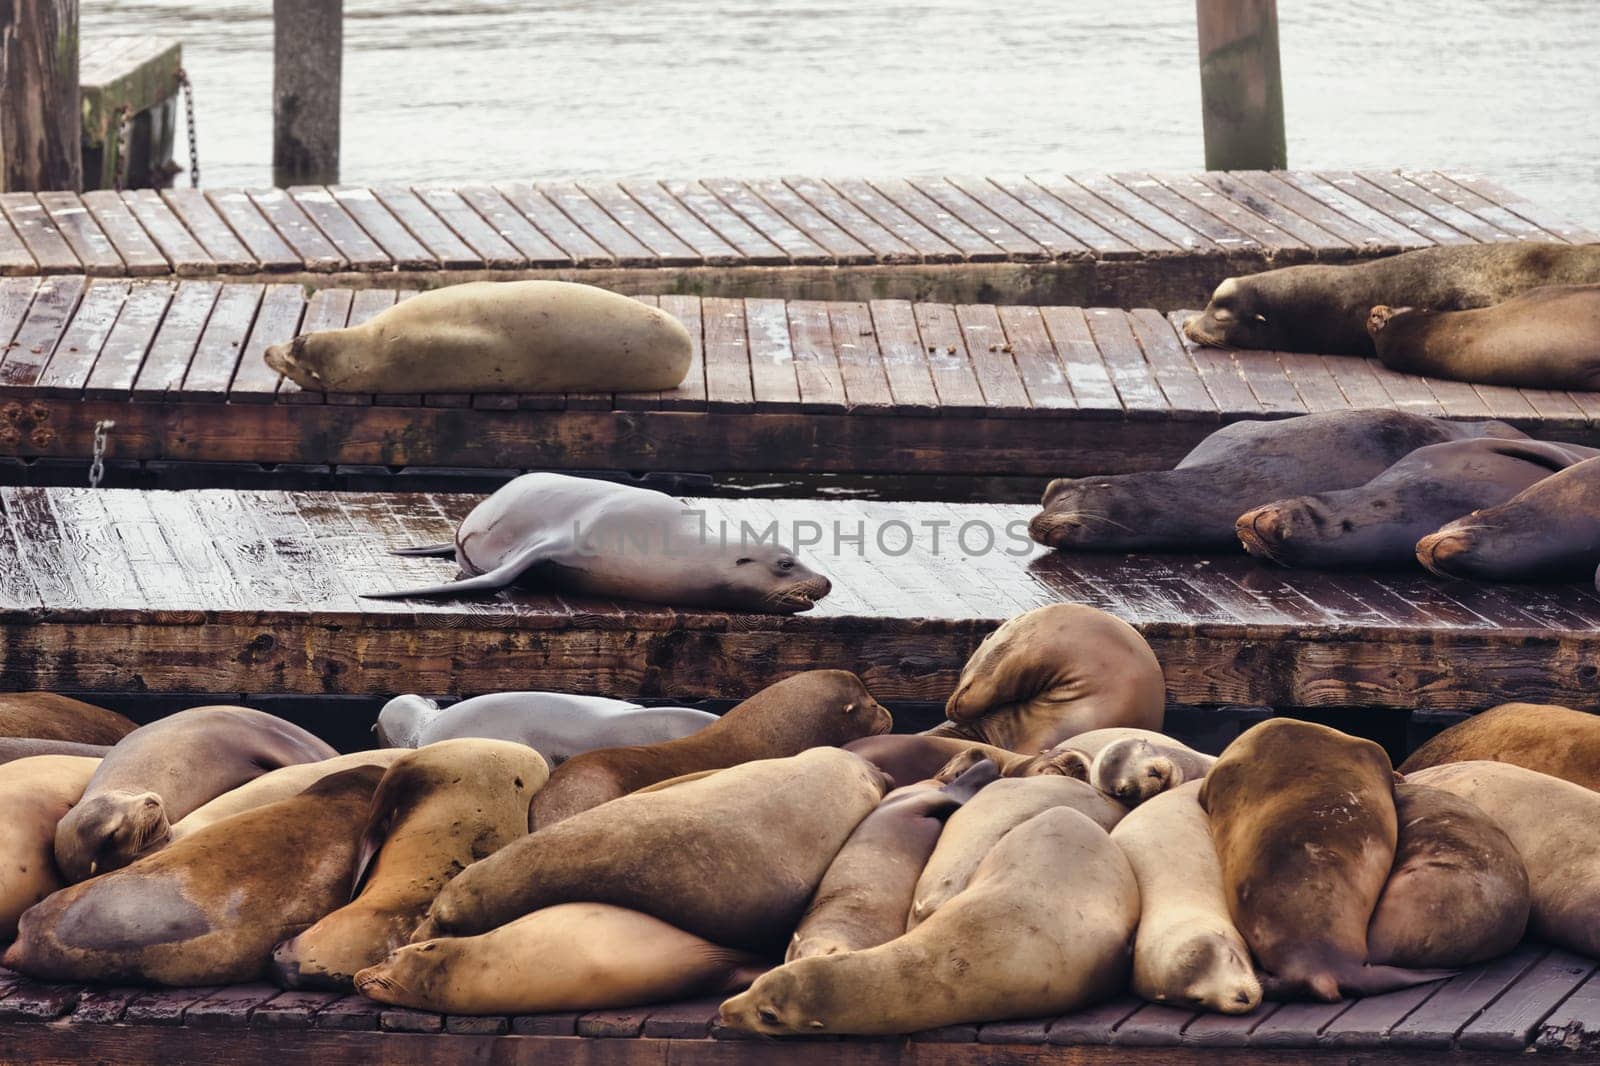 An amusing and heartwarming sight captured at a bustling San Francisco pier, showcasing sea lions taking a communal nap stacked atop one another. This fascinating animal behavior speaks to the social nature of these marine mammals and adds a touch of charm to any day by the sea.